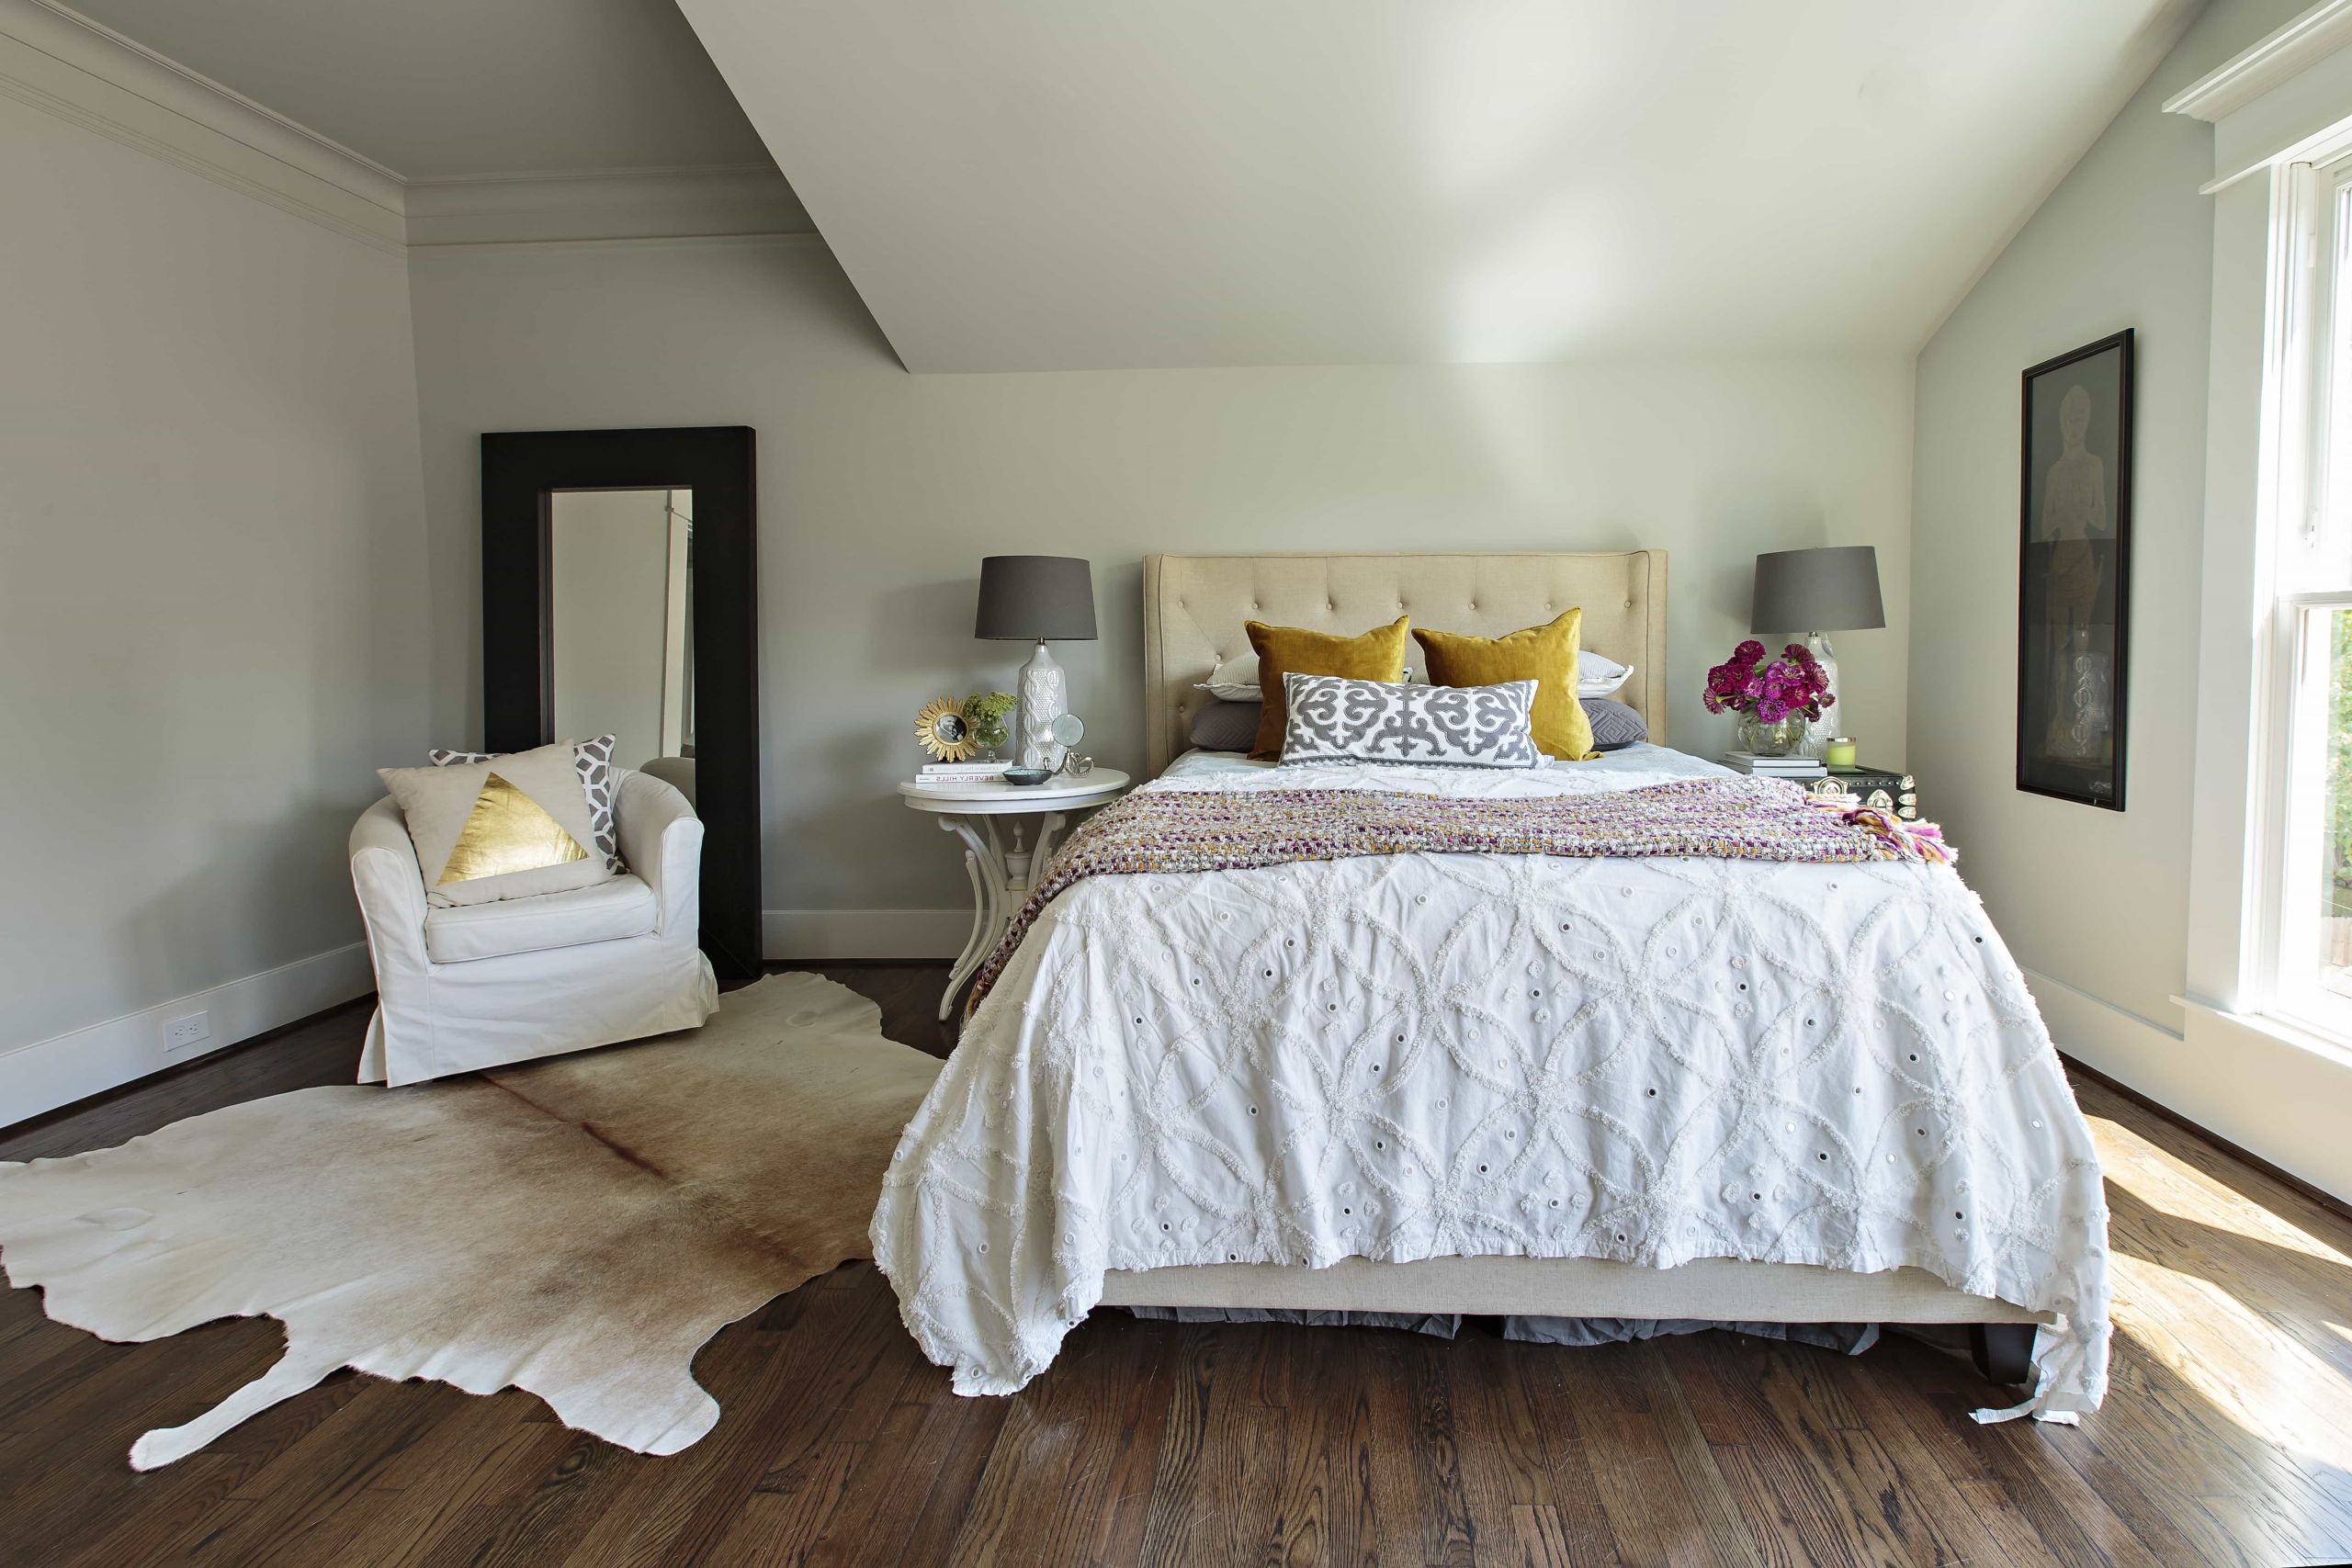 Modern Shabby Chic Bedrooms
 How To Decorate A Shabby Chic Bedroom